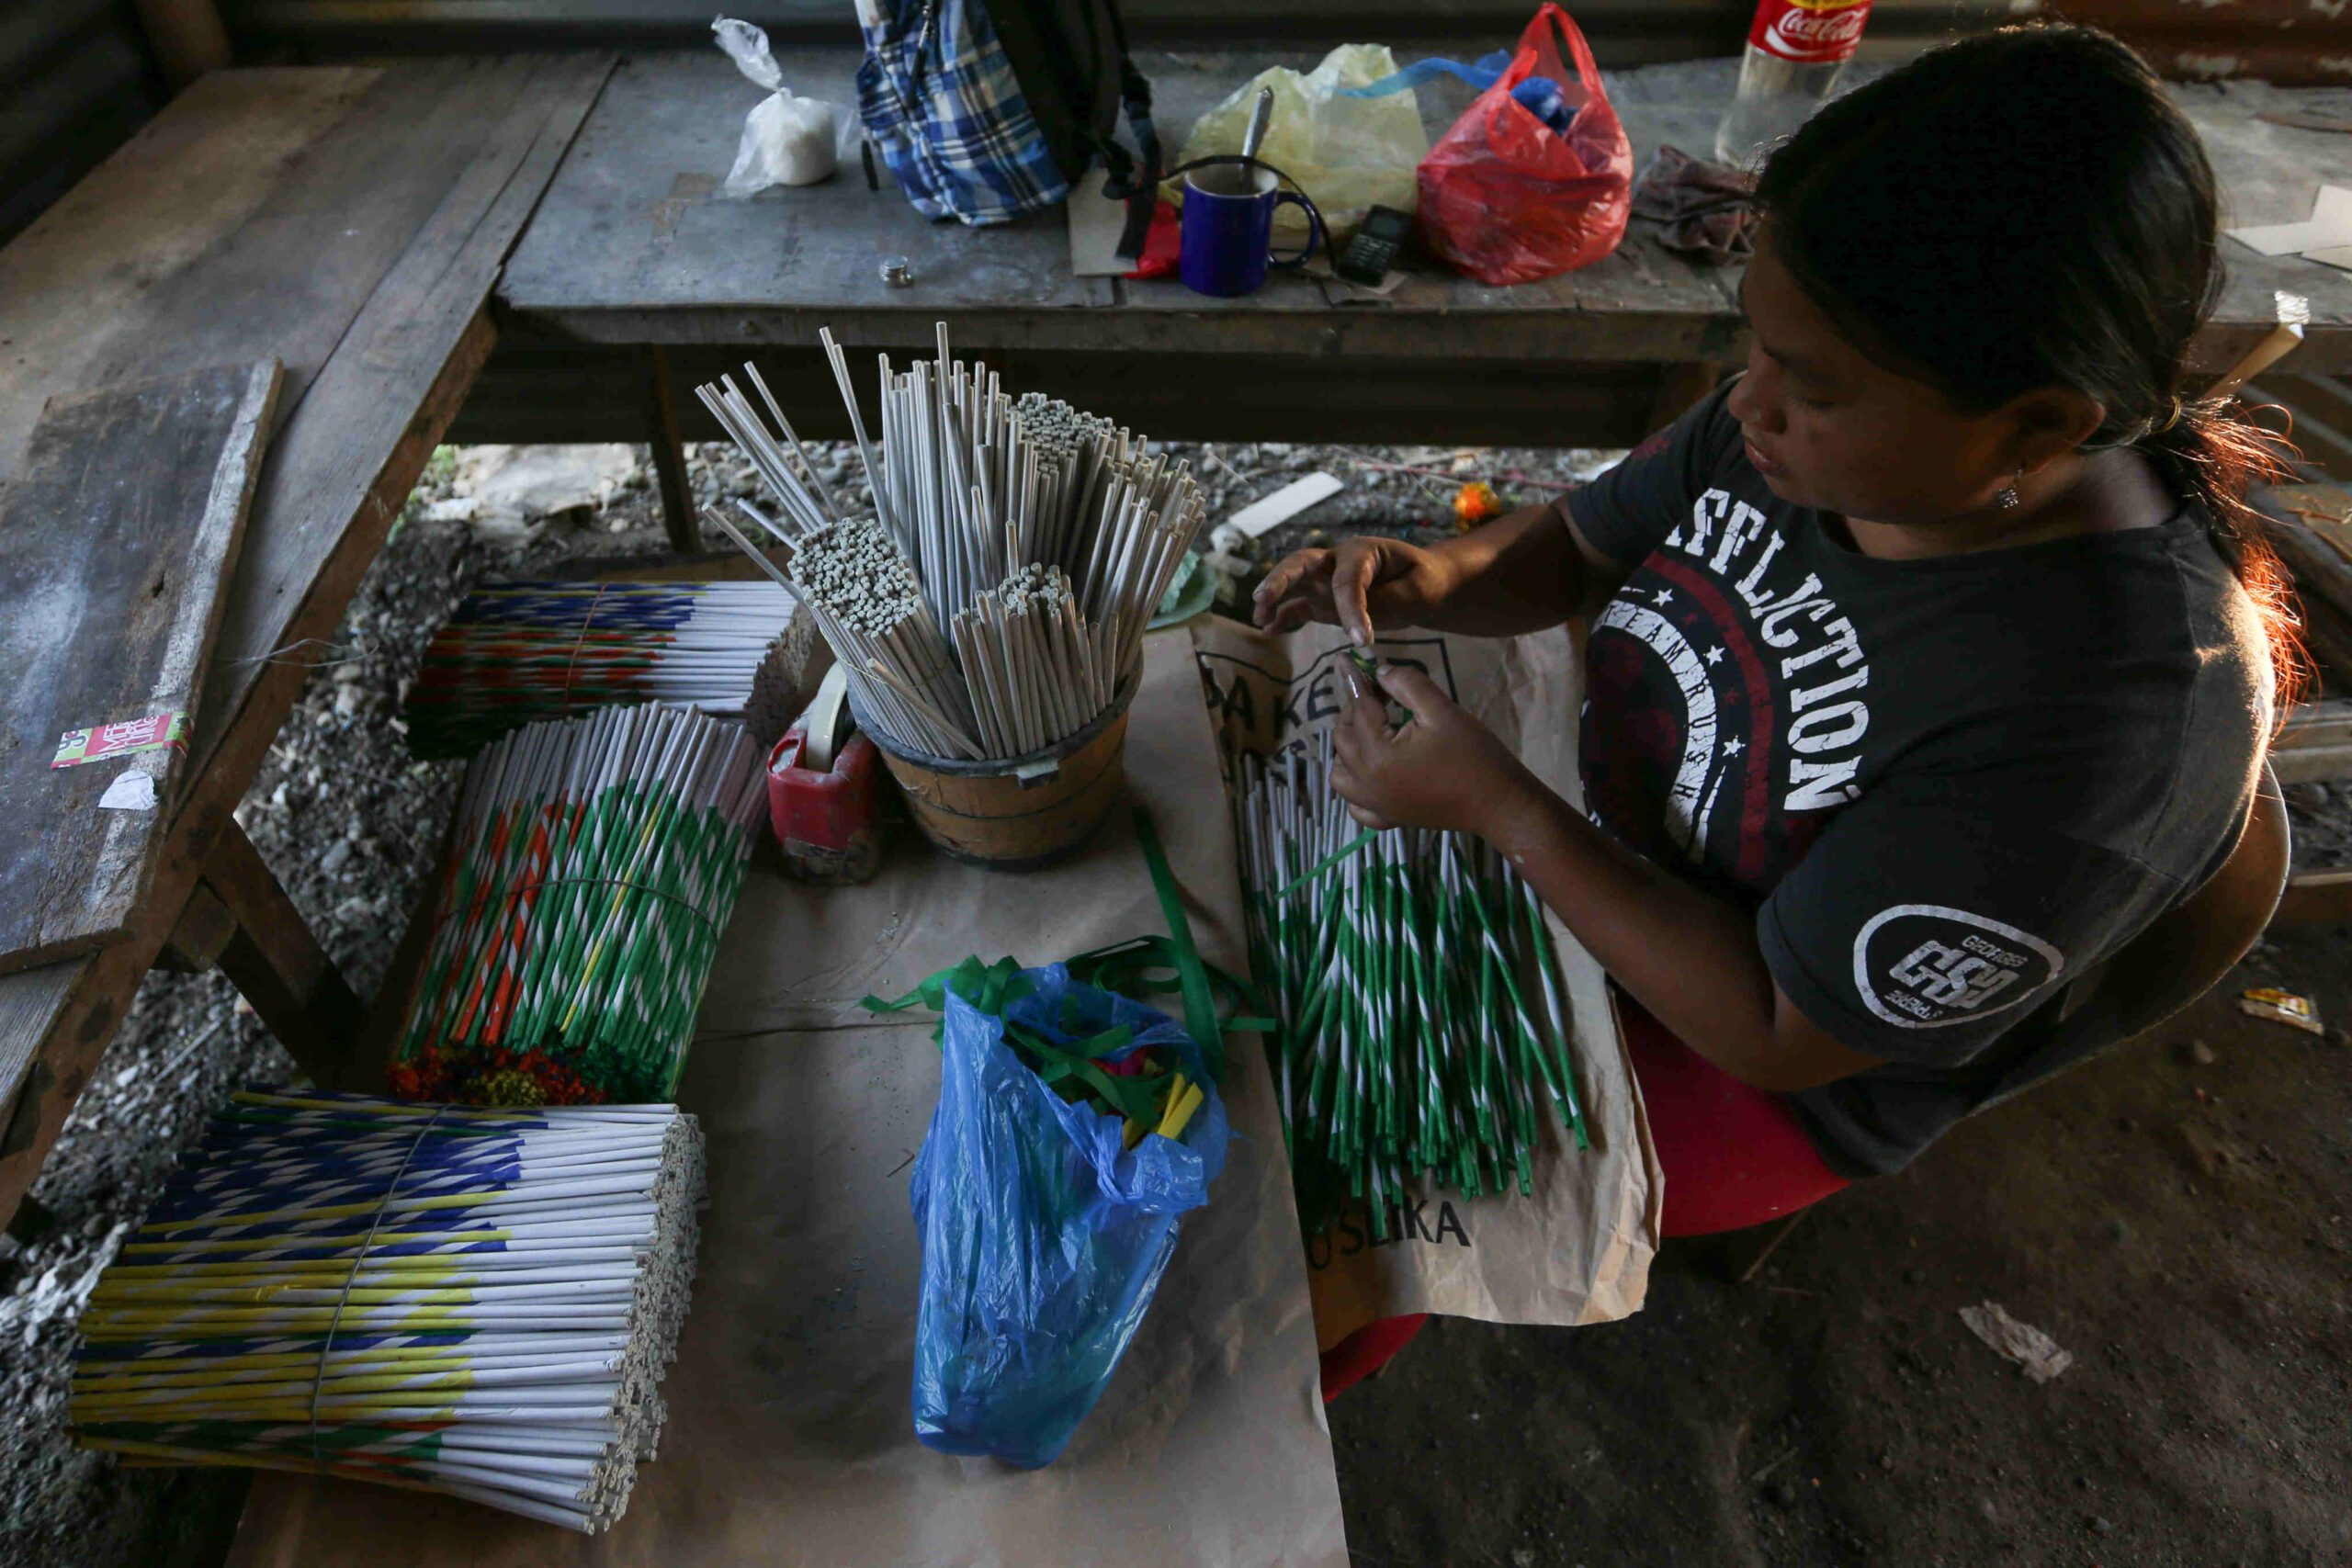 No firecrackers! Palace urges Filipinos to greet New Year with noisemakers